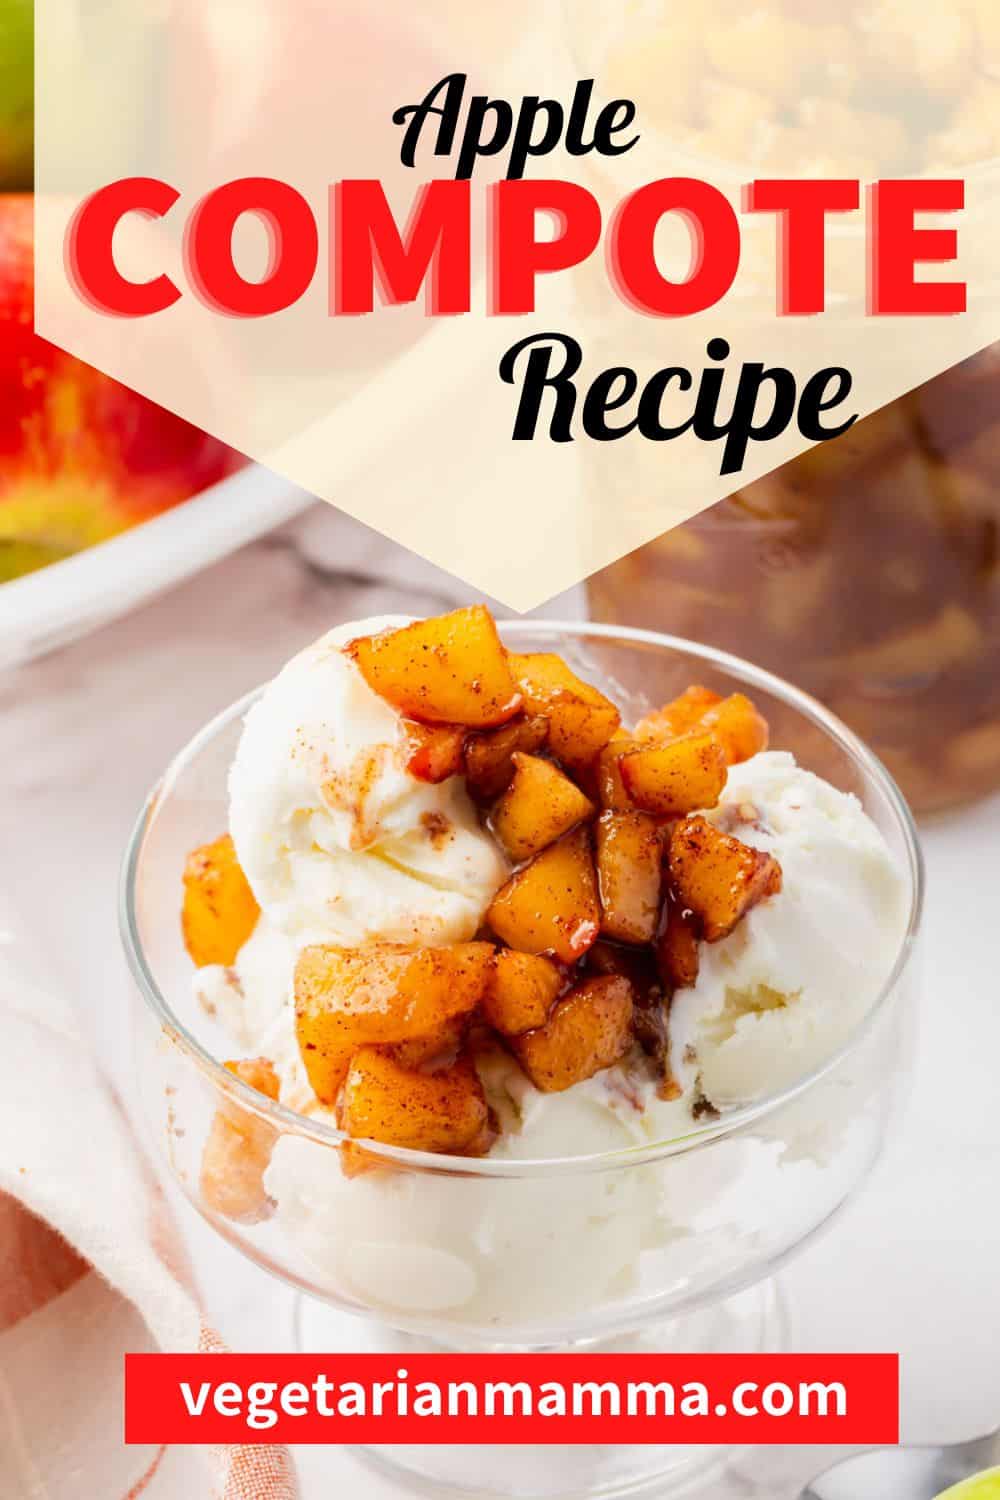 Fresh apples are easily cooked into a spiced Apple Compote that is delicious on everything from pancakes to ice cream. It takes less than 20 minutes to make this tasty apple topping that everyone will love.